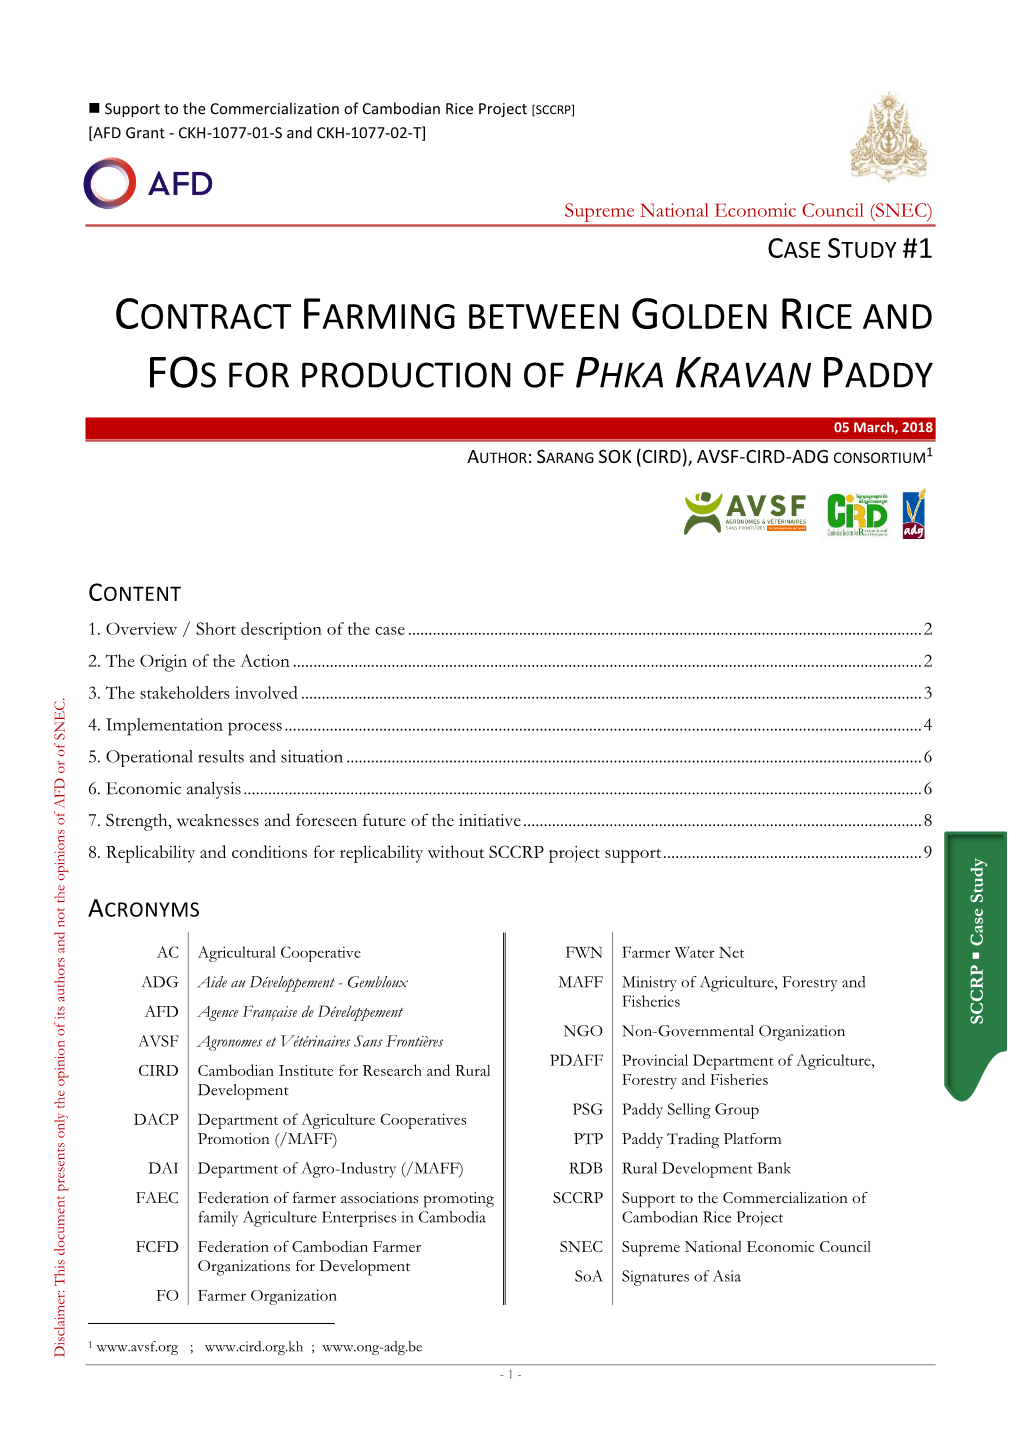 Support to the Commercialization of Cambodian Rice Project [SCCRP] [AFD Grant - CKH-1077-01-S and CKH-1077-02-T]